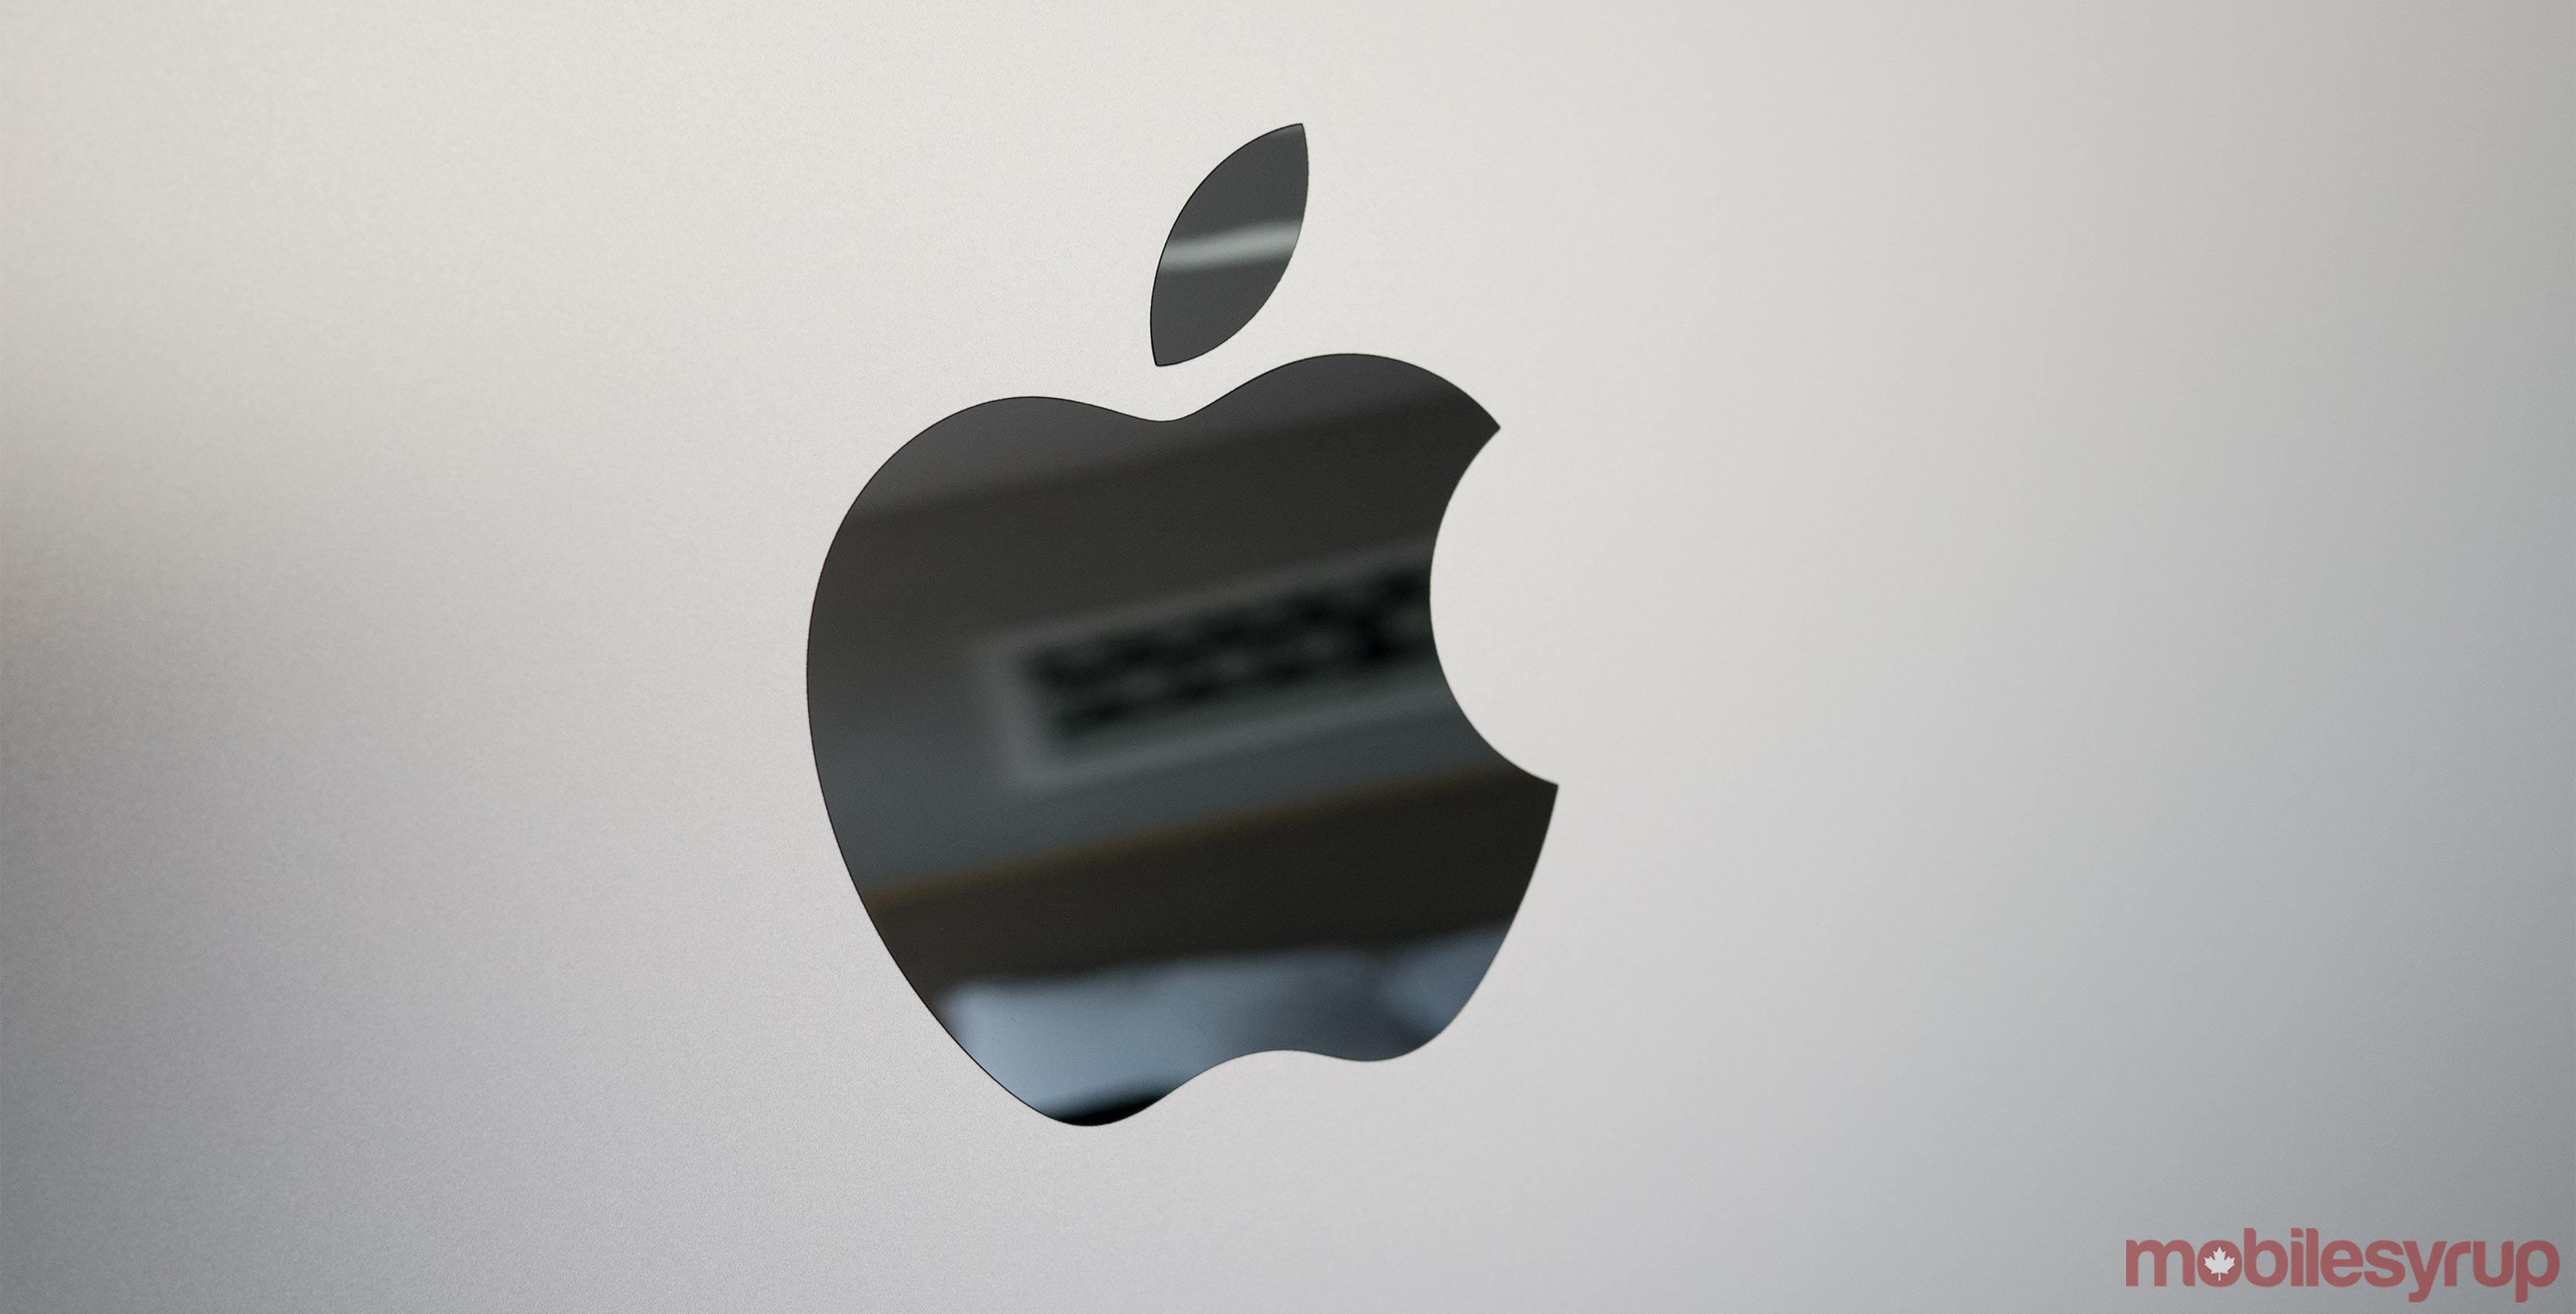 An image showing the Apple logo